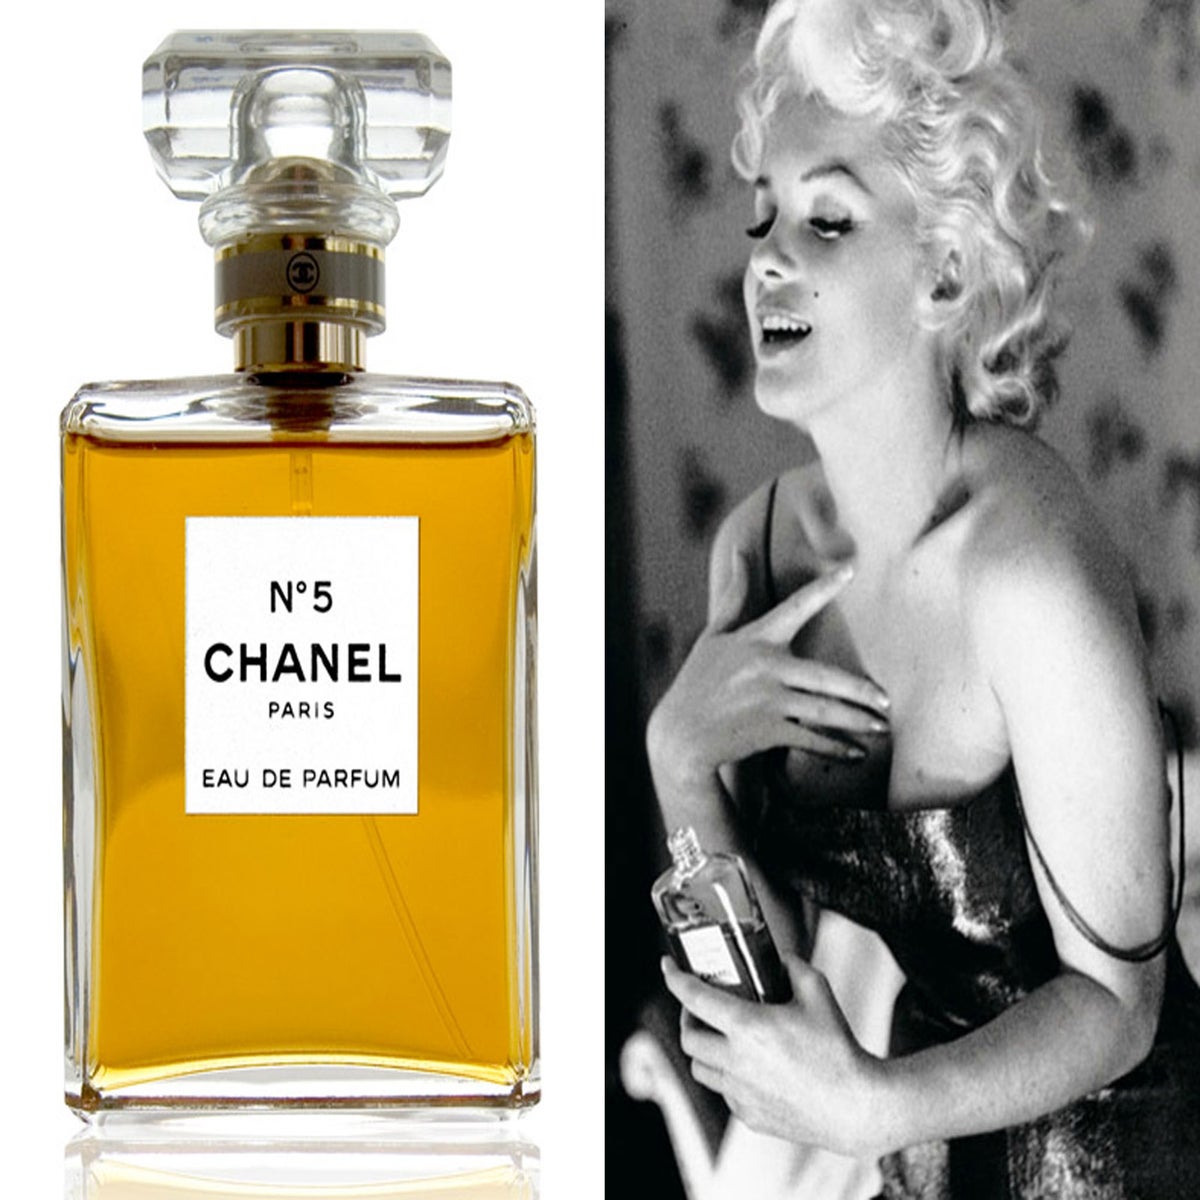 Iconic Chanel No 5 perfume to reformulate under new EU